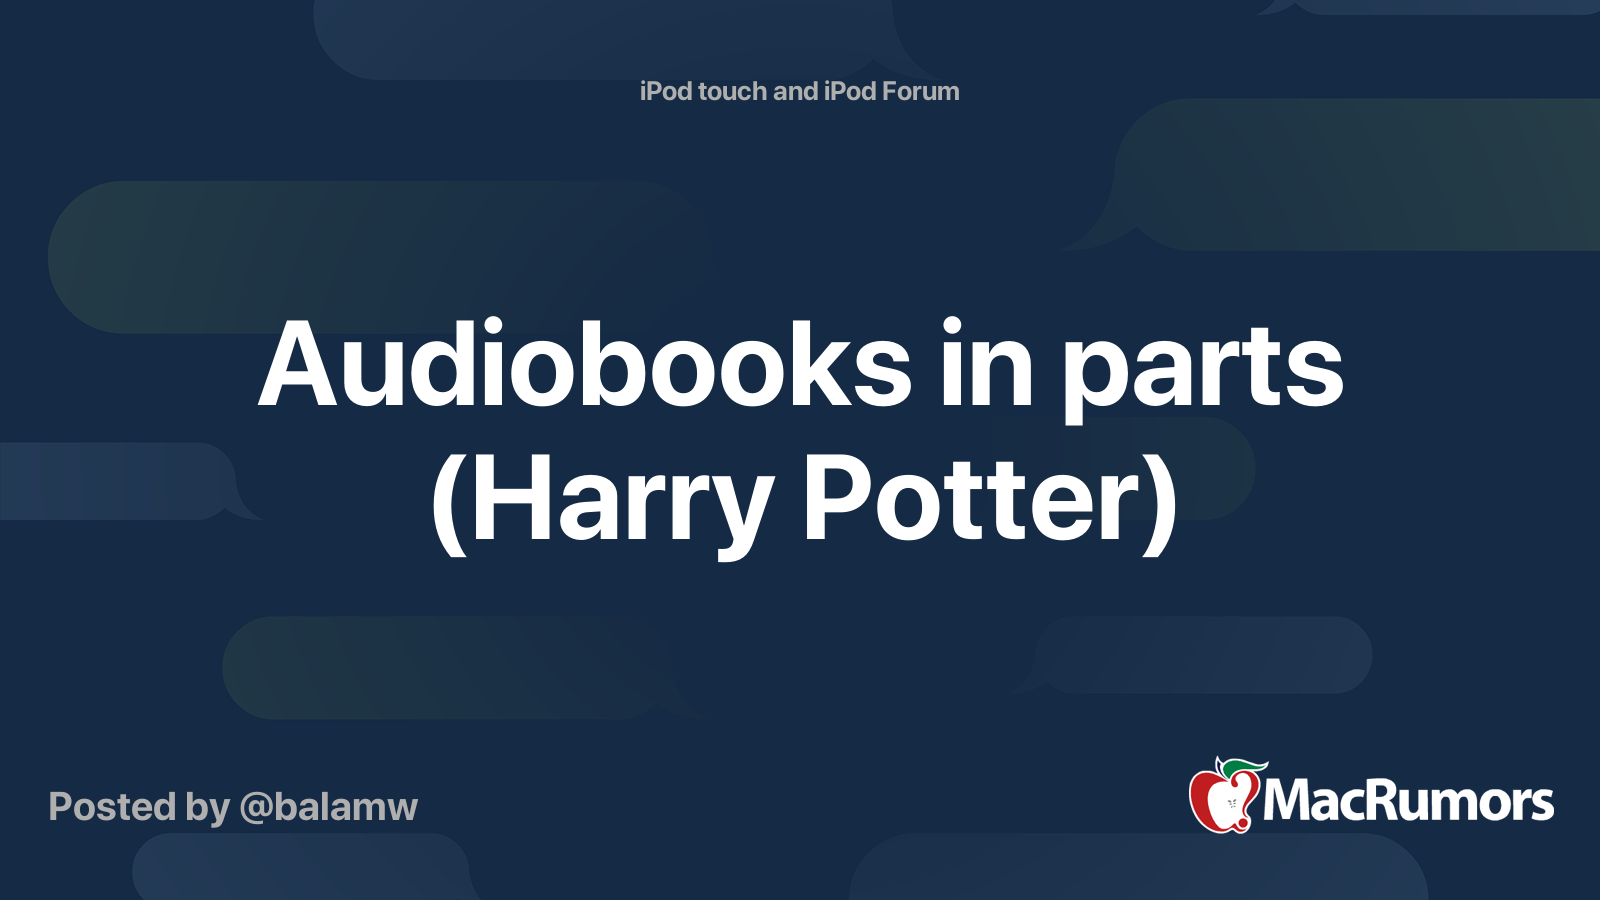 How do I create a playlist for the Harry Potter audiobooks? 2